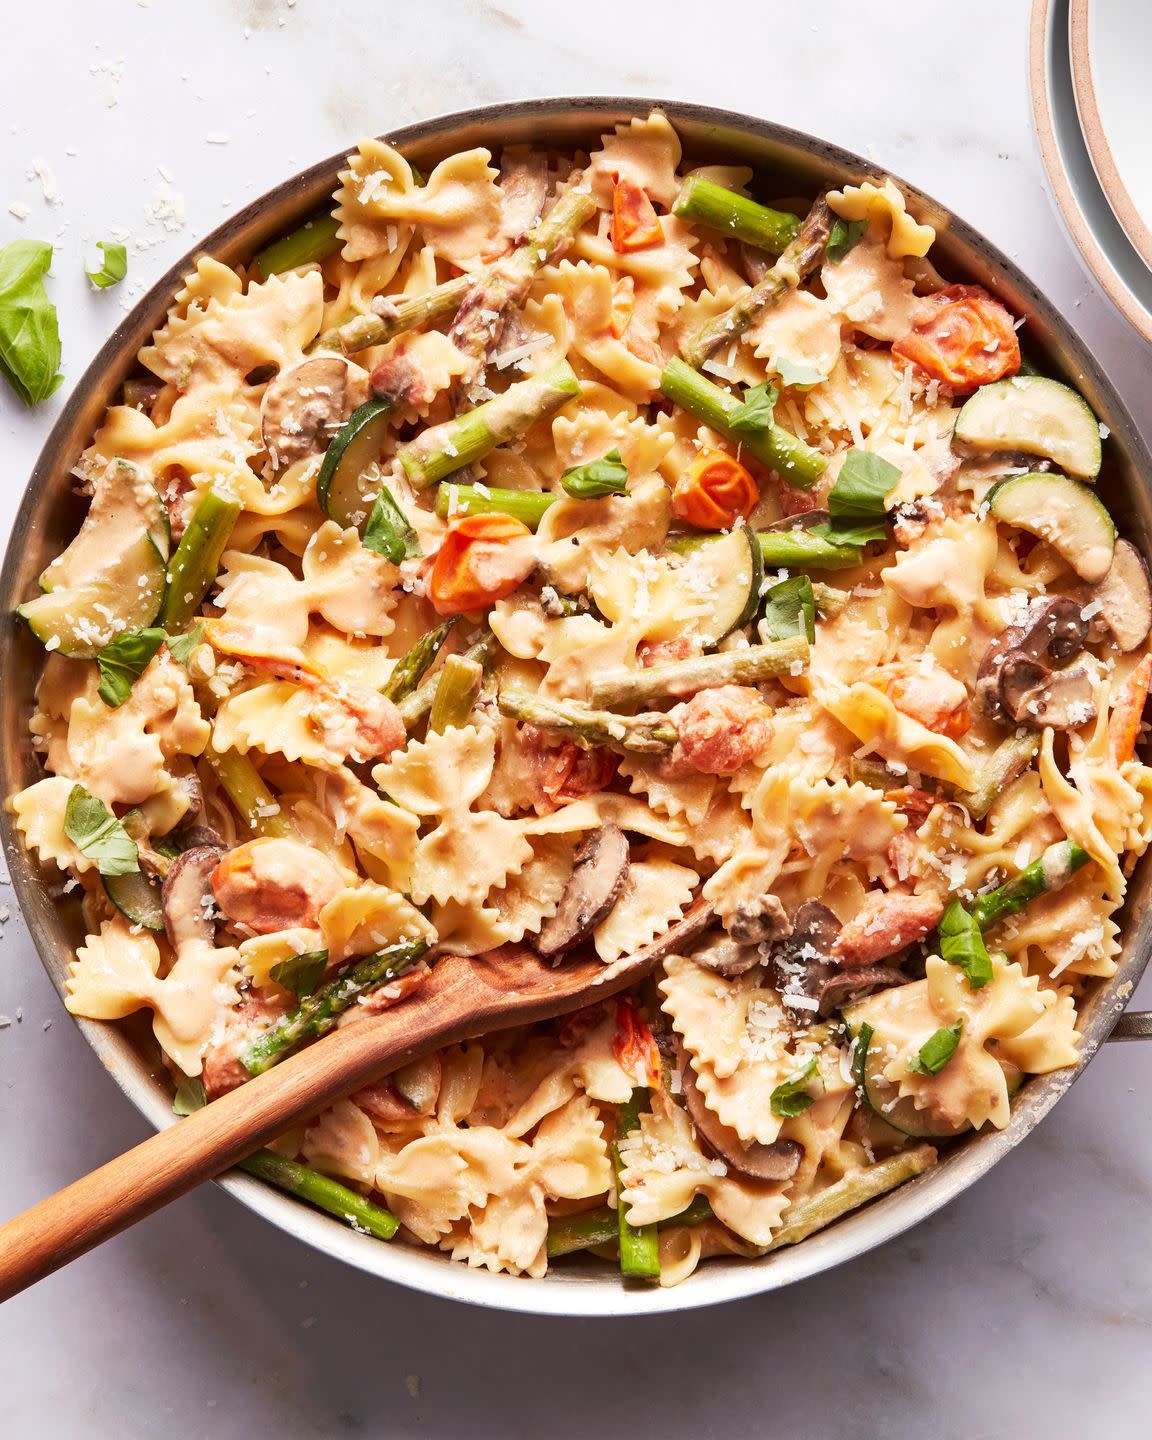 bowtie pasta with asparagus, tomatoes, zucchini and parmesan